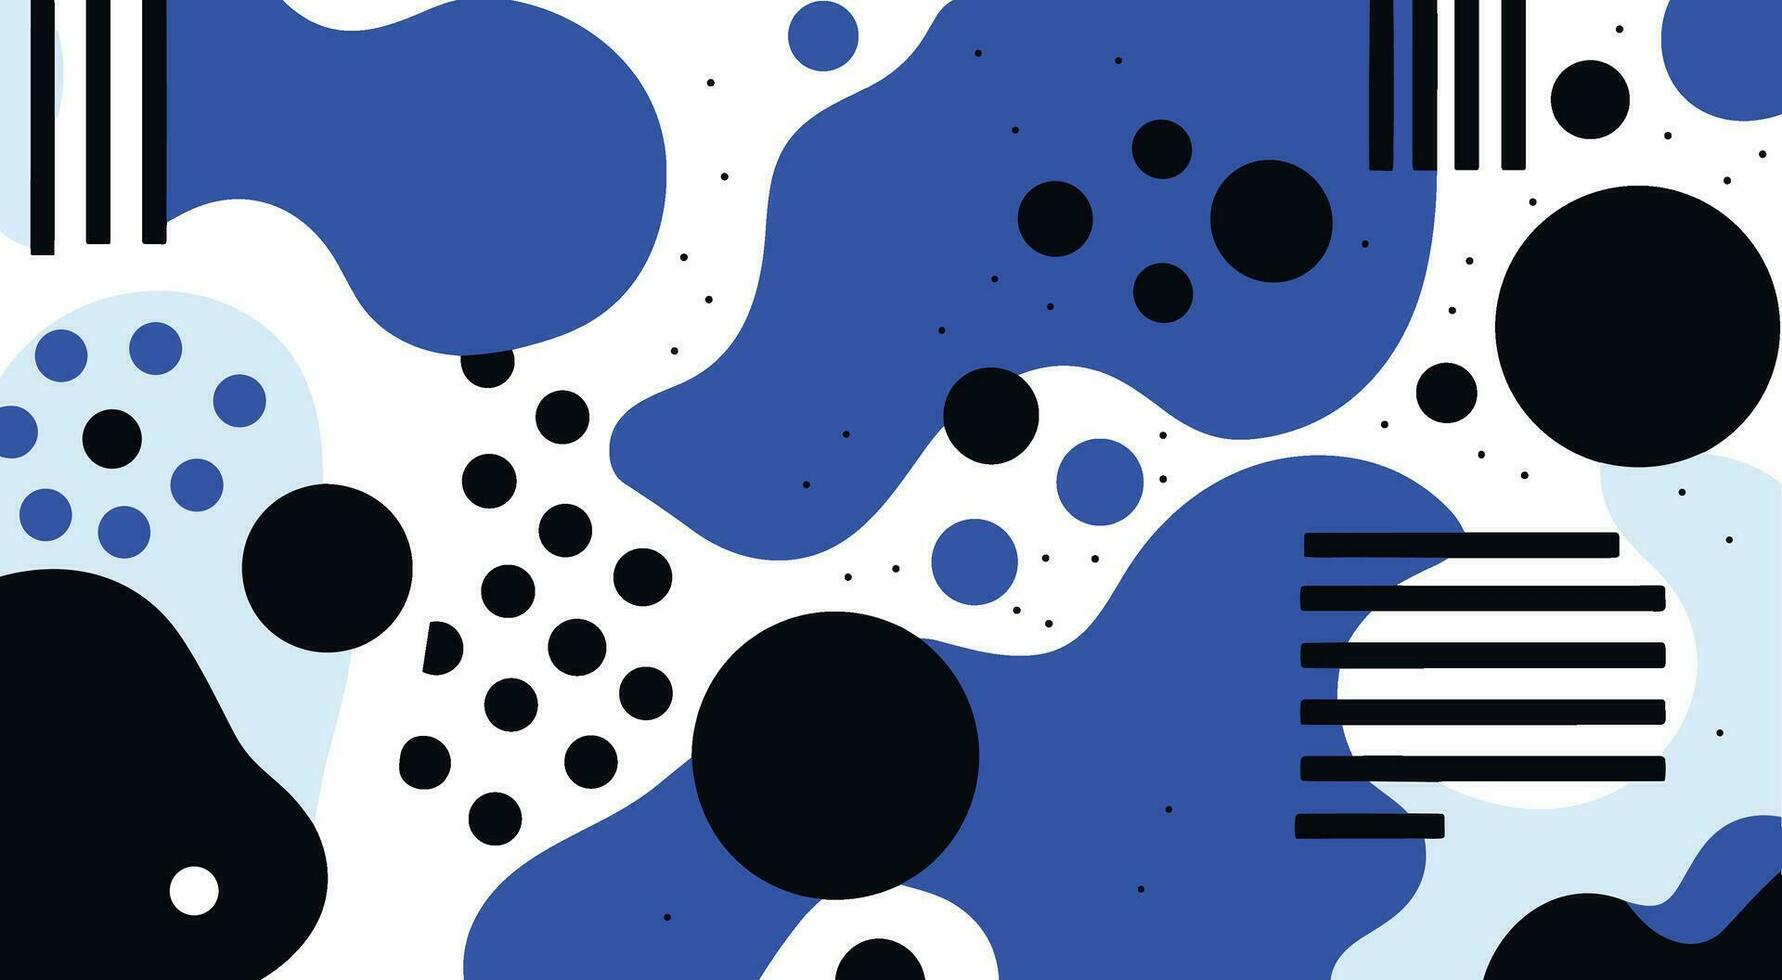 abstract background with shapes and abstract background vector, in the style of white and navy, abstraction-creation, blue and black, stripes and shapes, memphis design, rounded shapes vector